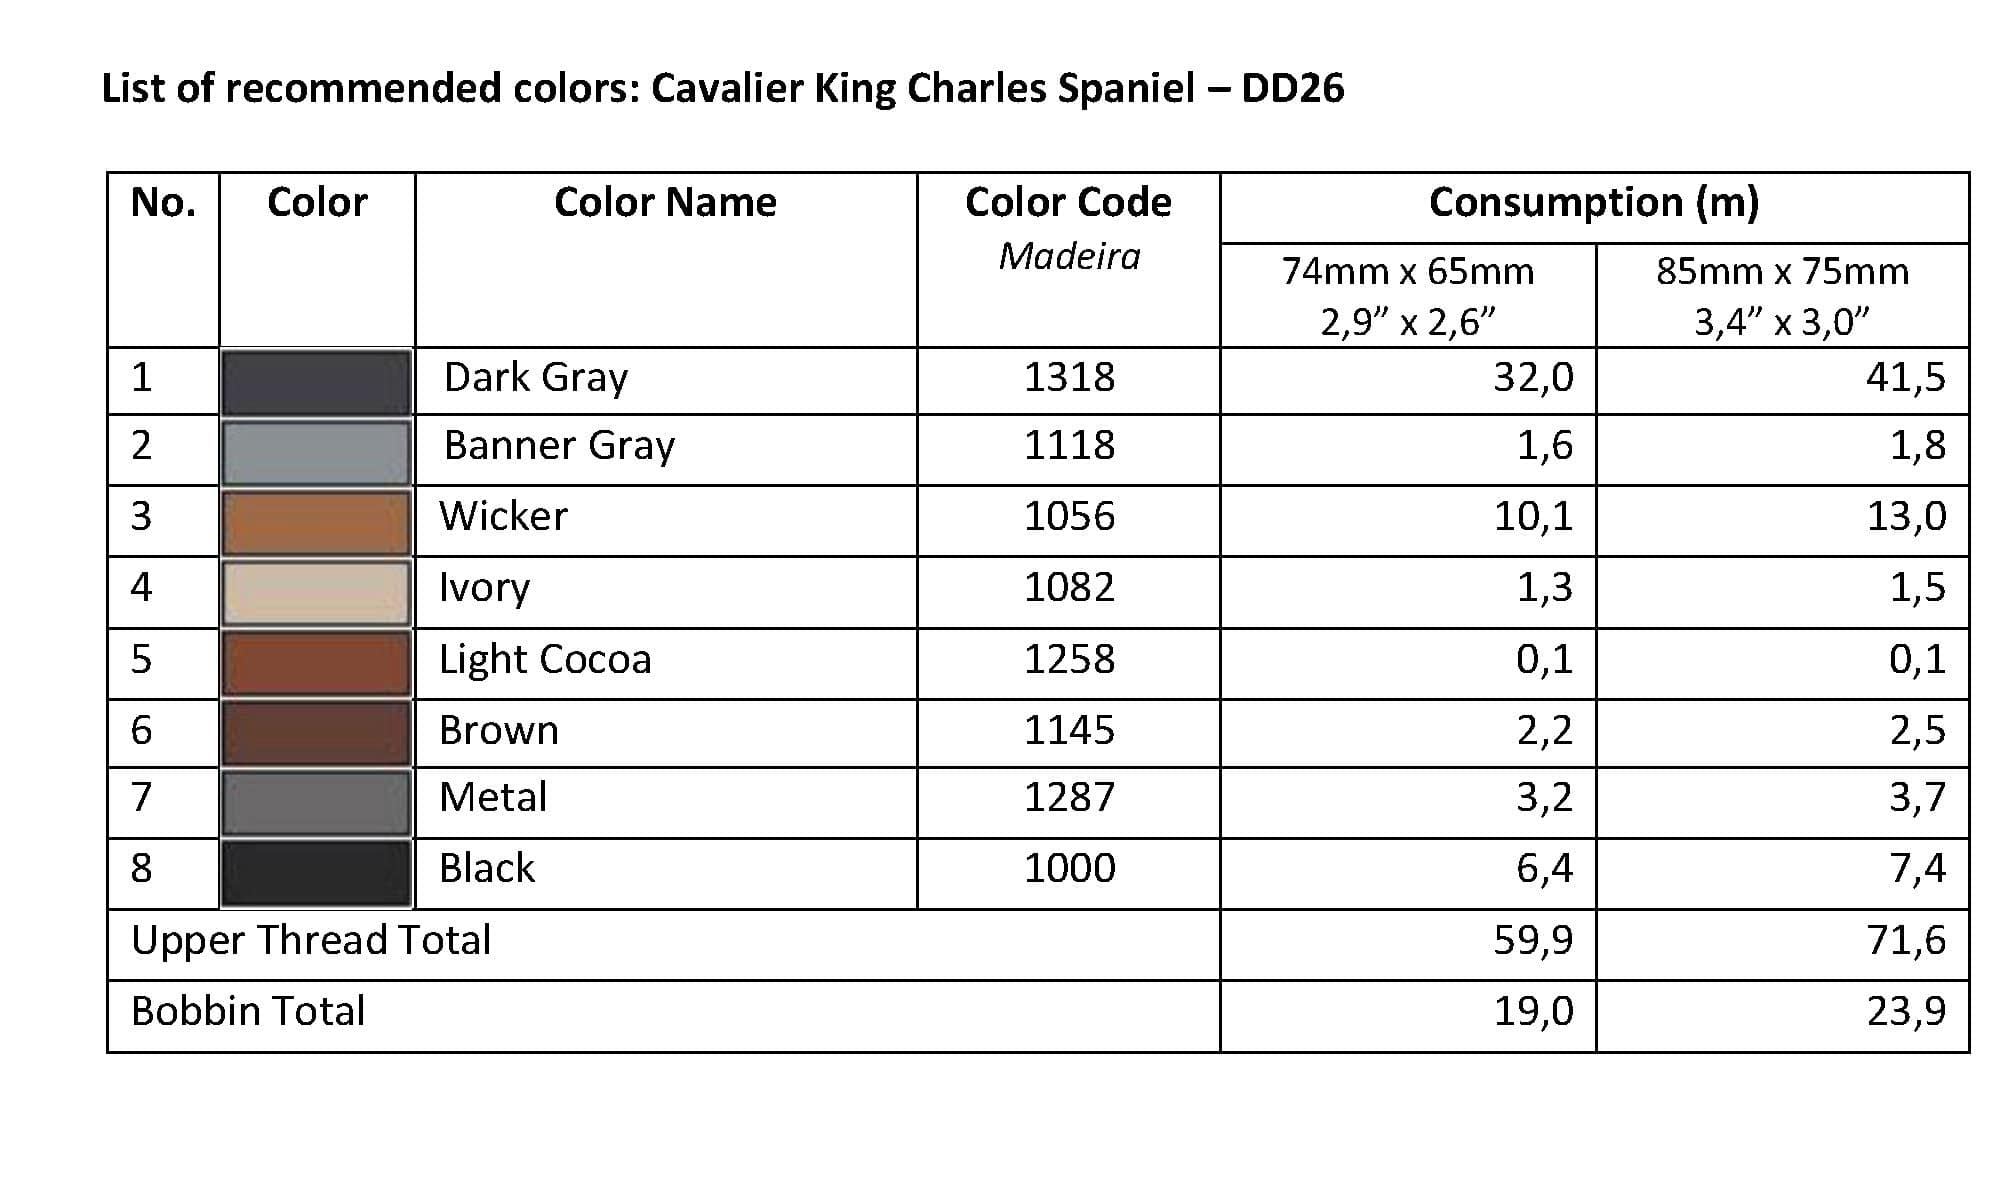 List of Recommended Colors - Cavalier King Charles Spaniel DD26